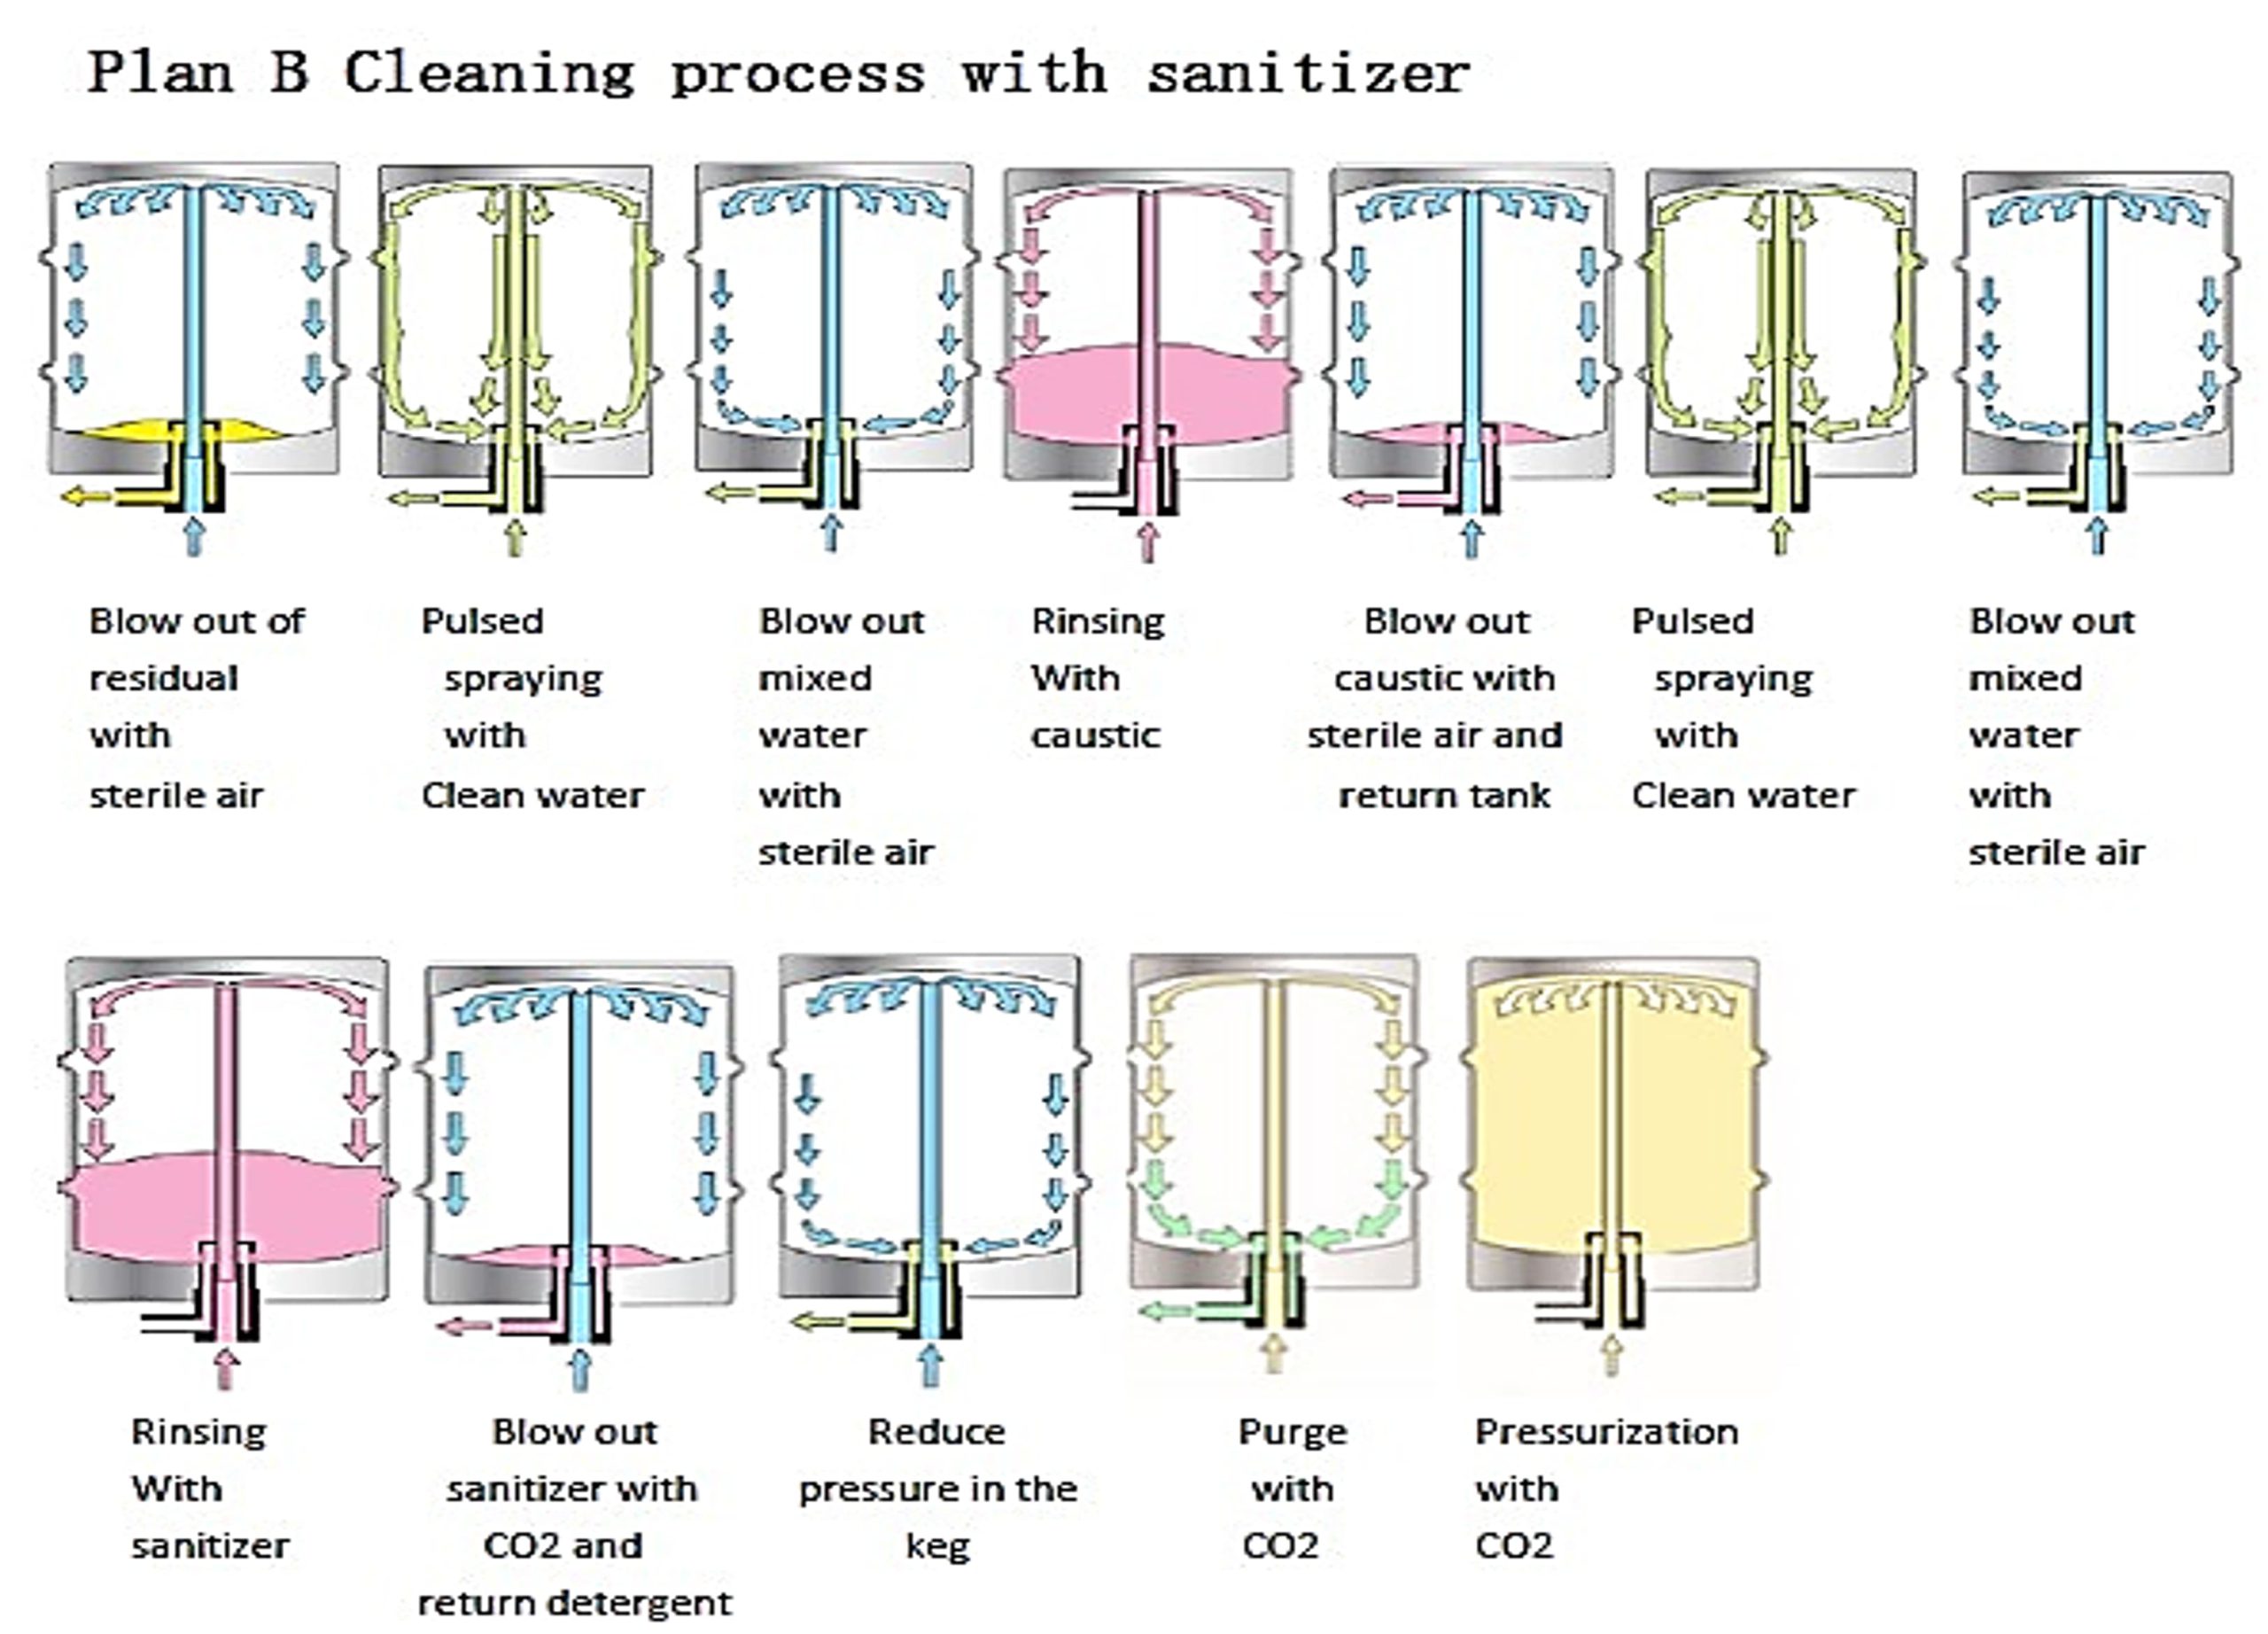 SKE-KW-Ⅱ | Plan B cleaning process with sanitizer